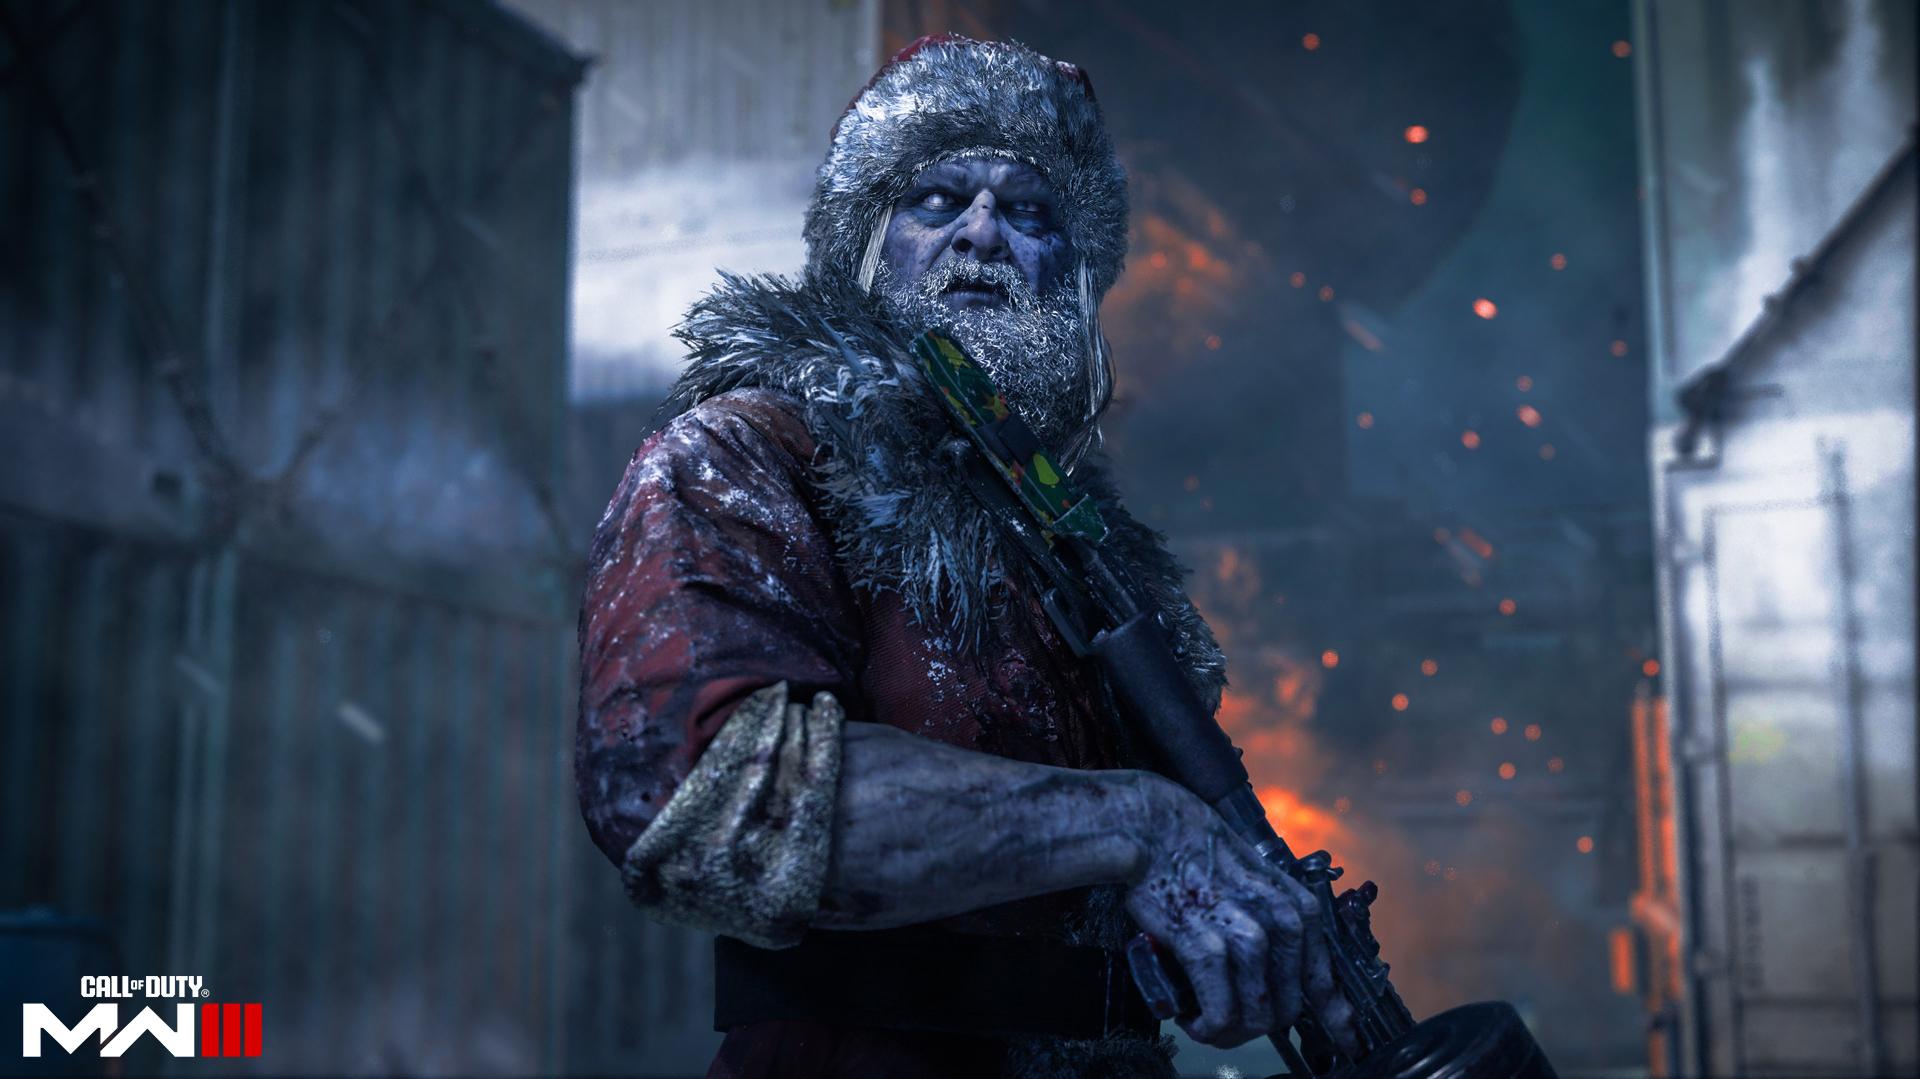 Call Of Duty Mw3 Adds Zombie Santa Undead Deer Hunting And